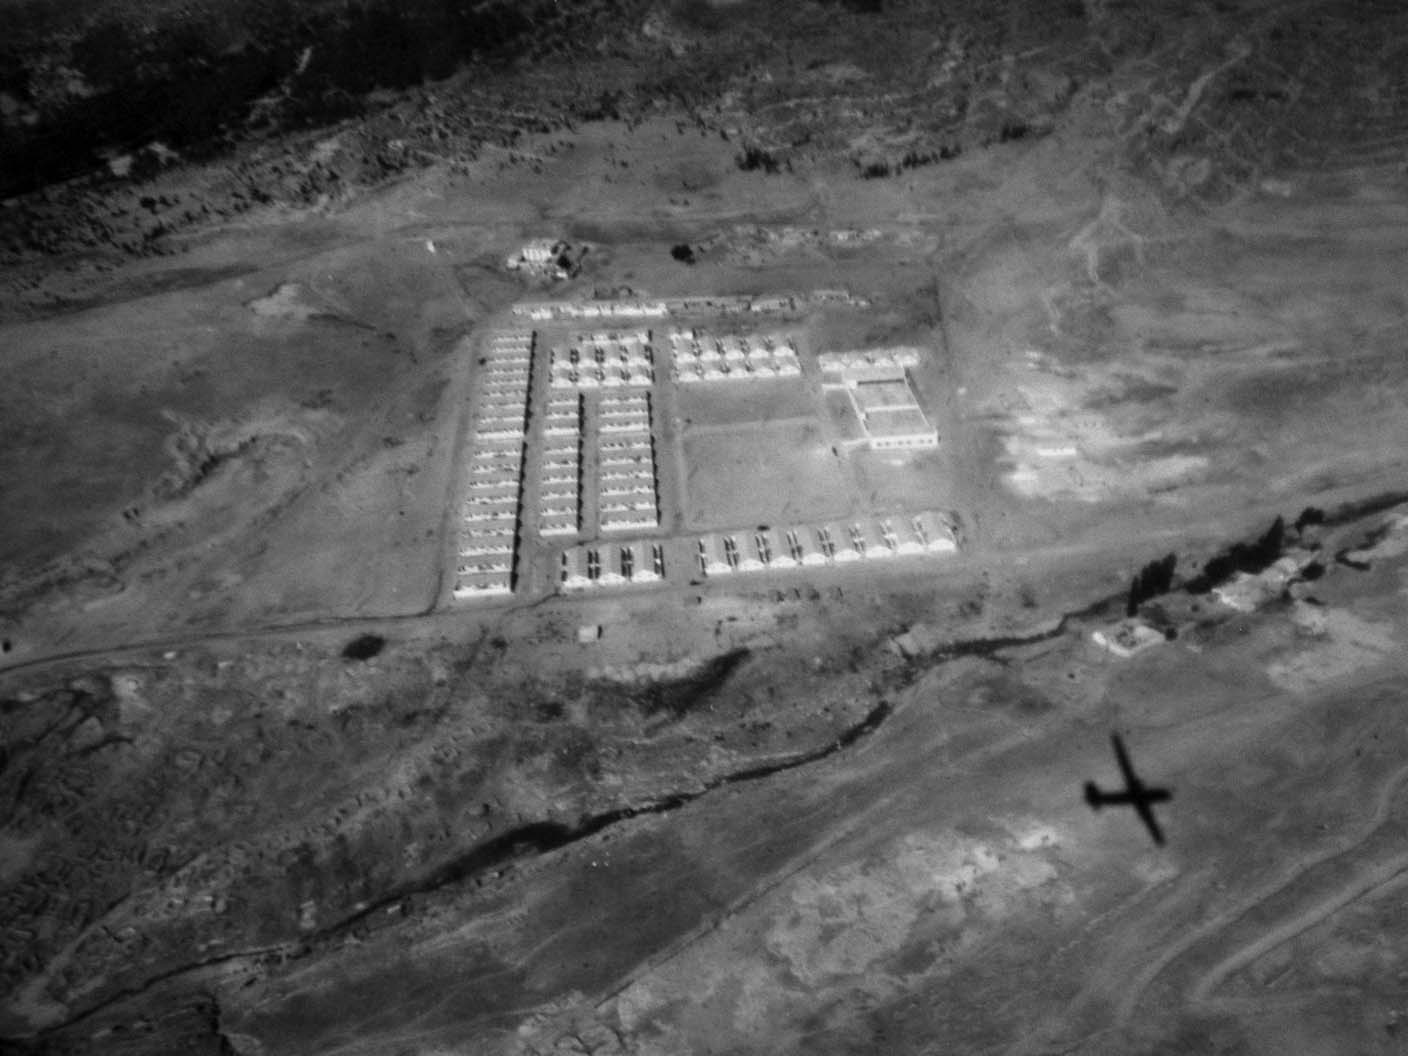 A camp built by the French army in Tiaret (Algeria) in the 1960s, whose aim was to monitor the daily life of civilians and contain the revolution. Image: Service Historique de l’Armée de Terre, 1H 1119. 